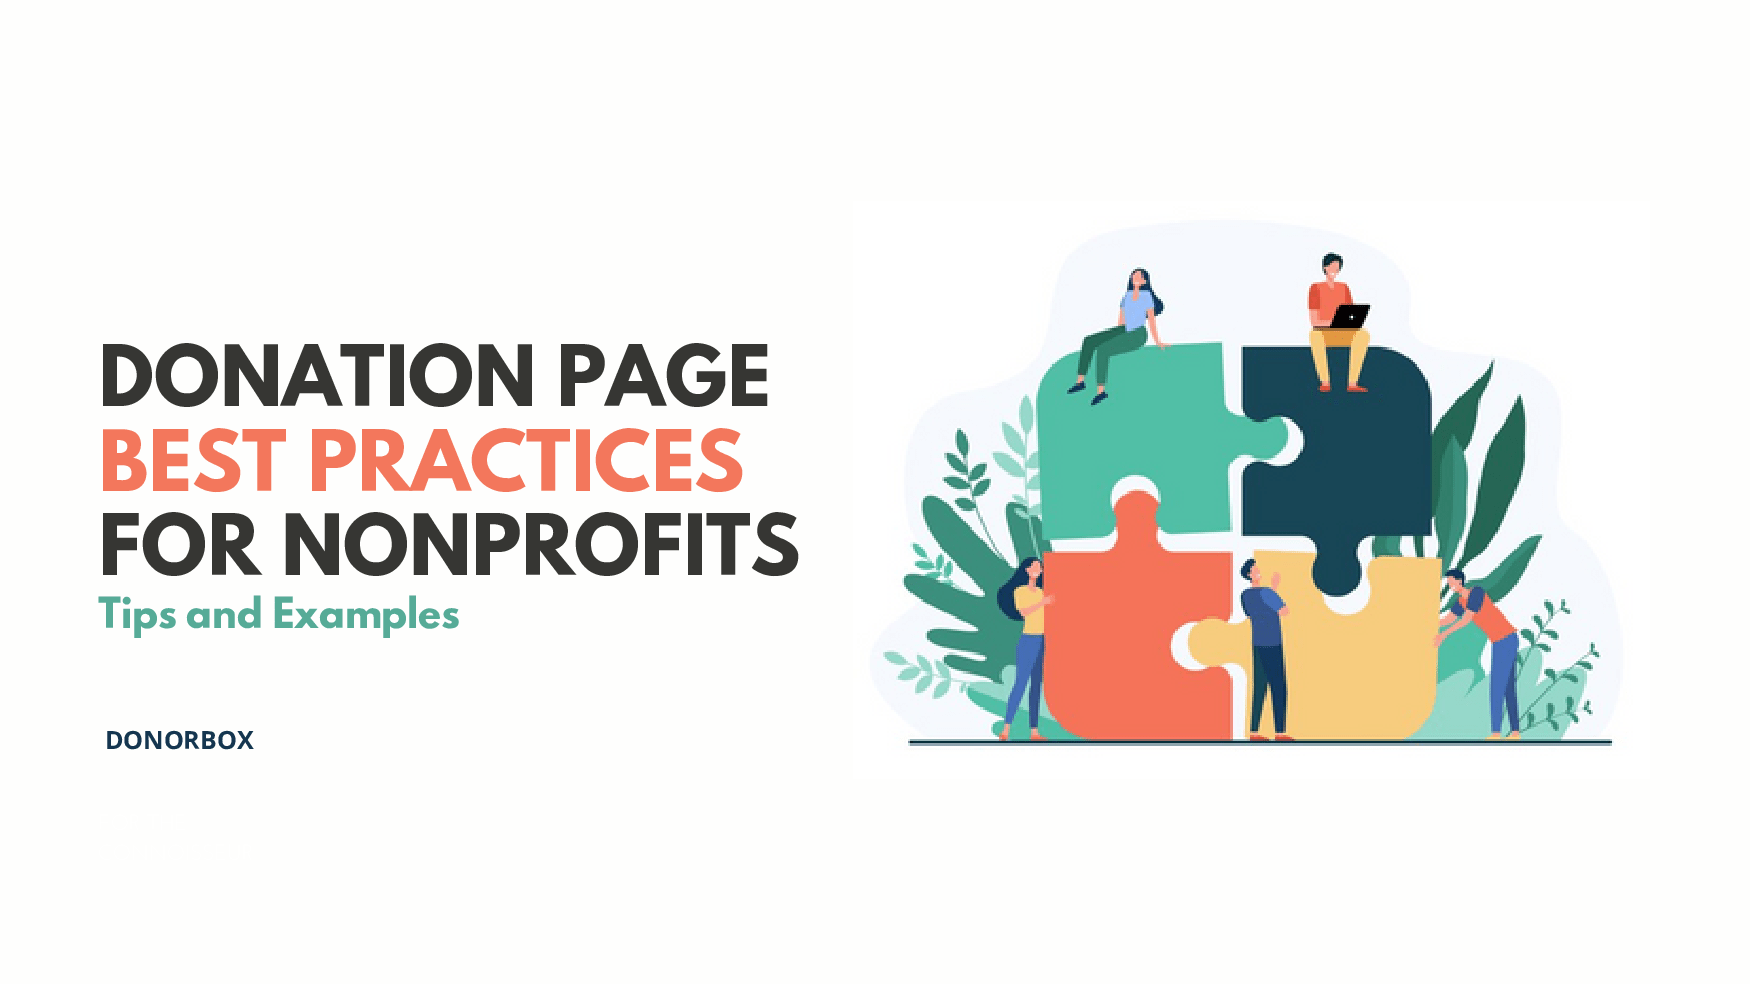 Donation page best practices